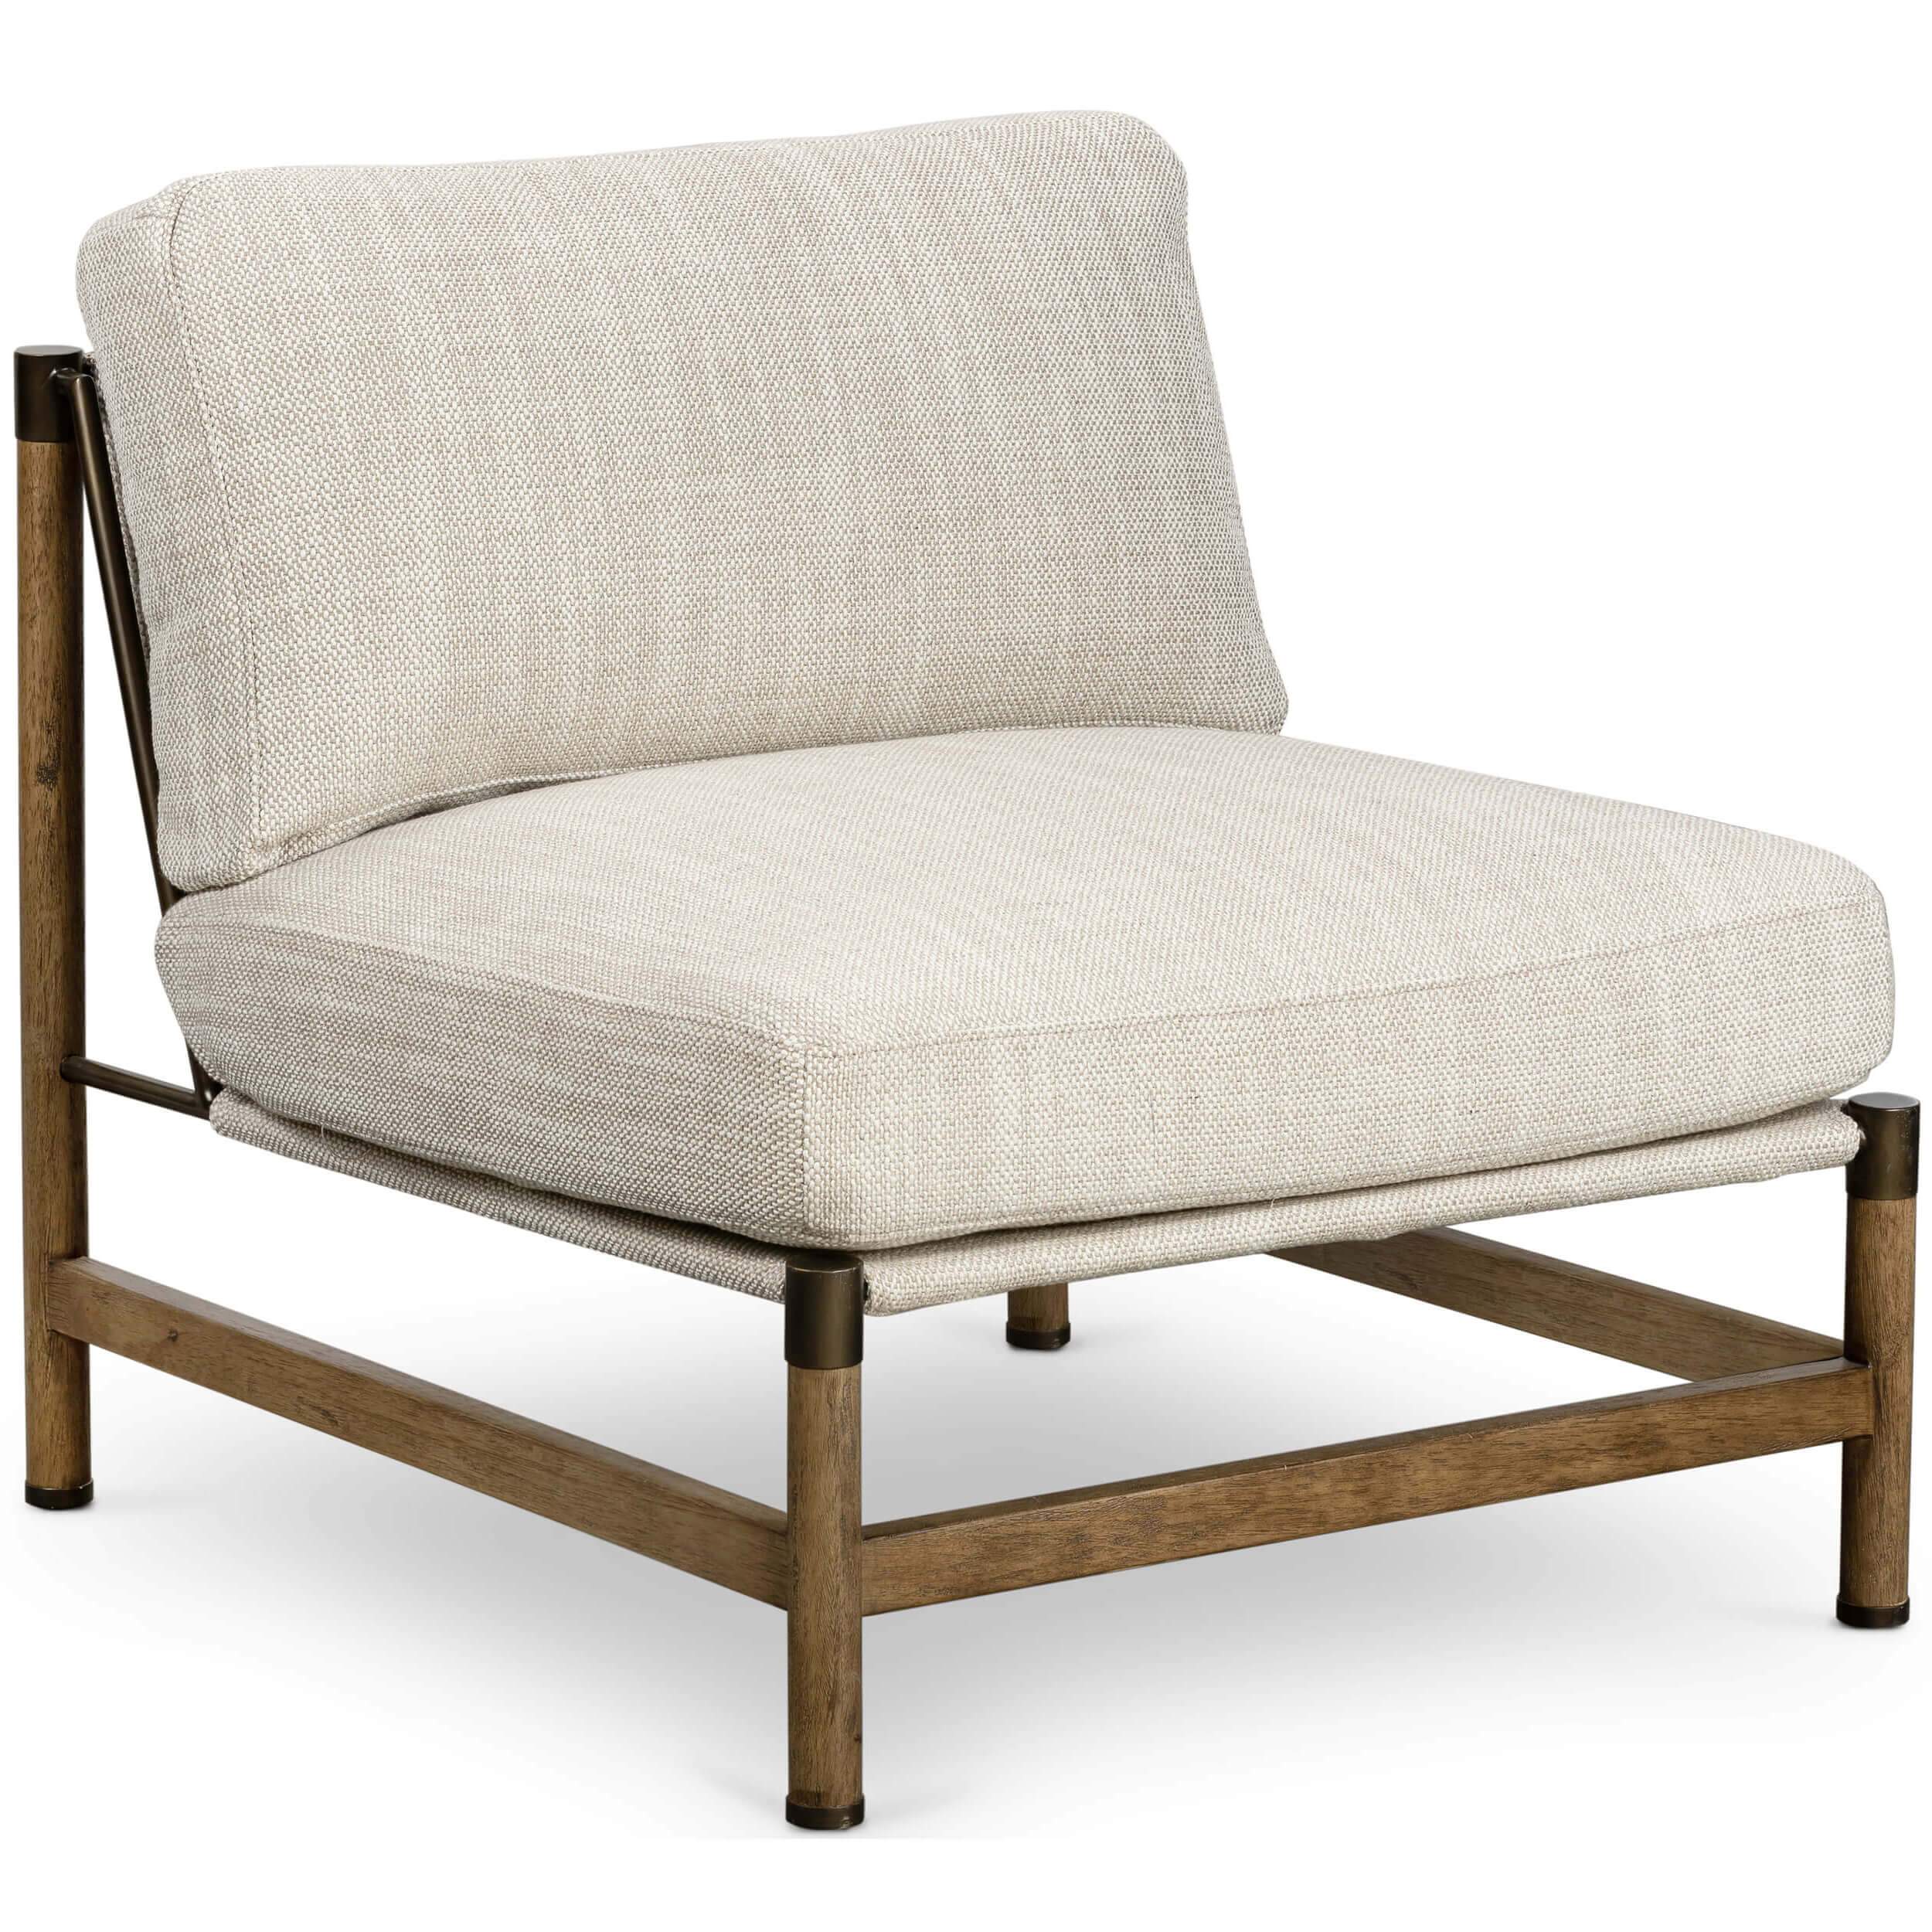 Image of Memphis Chair, Gable Taupe